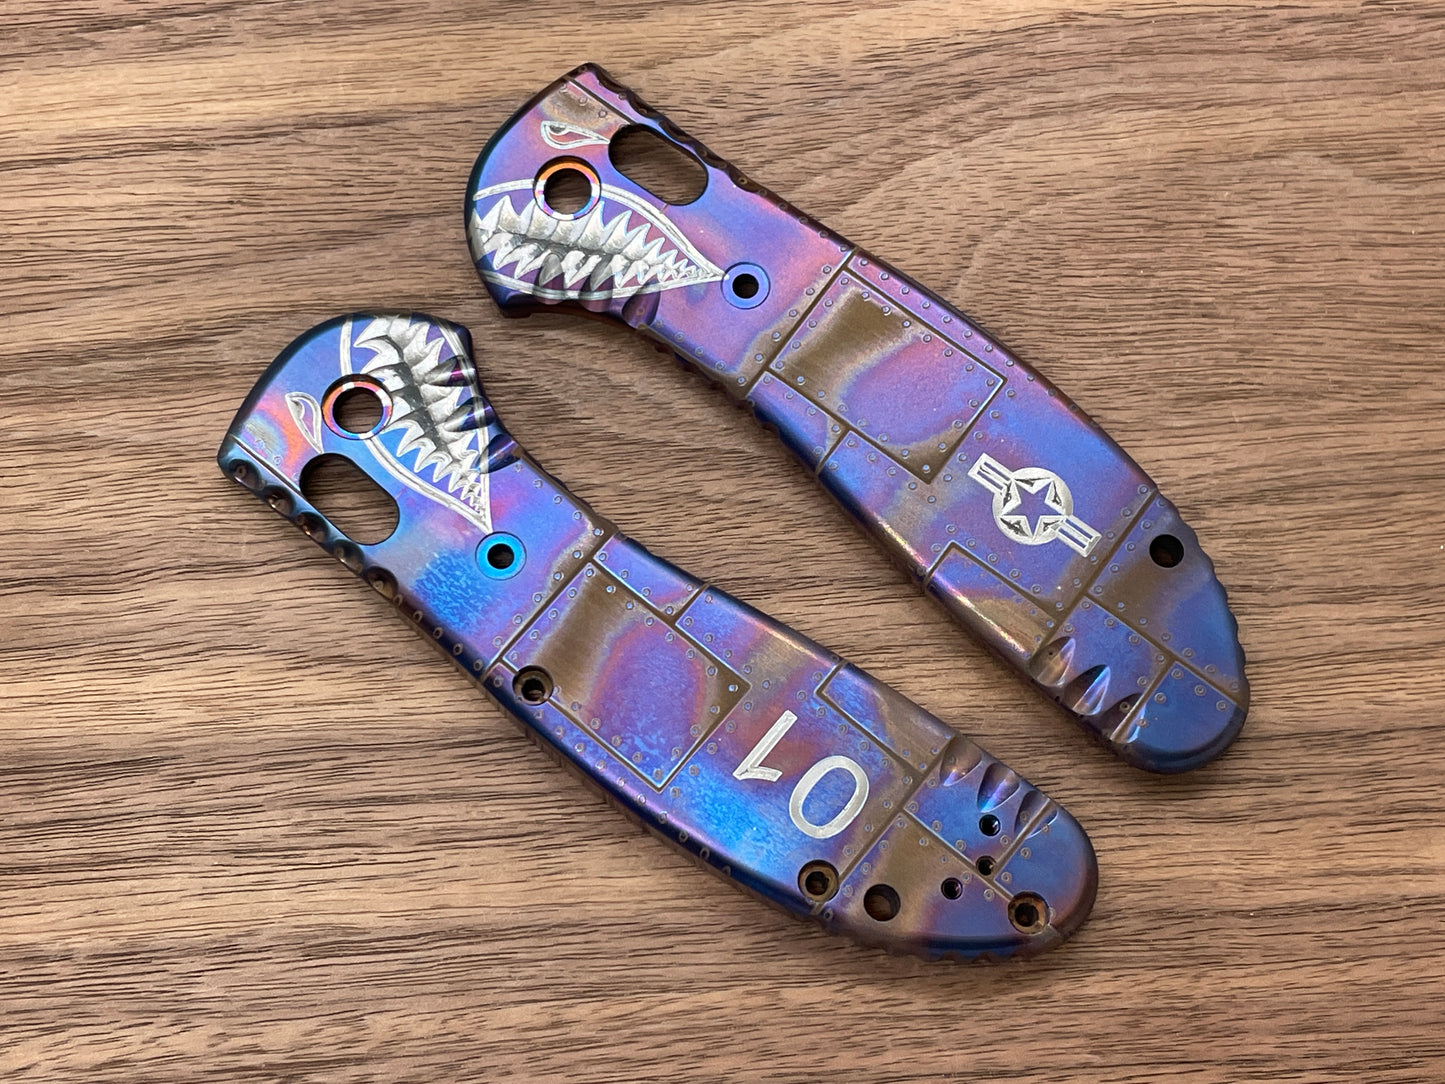 P40 Riveted Airplane Flamed Titanium Scales for Benchmade GRIPTILIAN 551 & 550